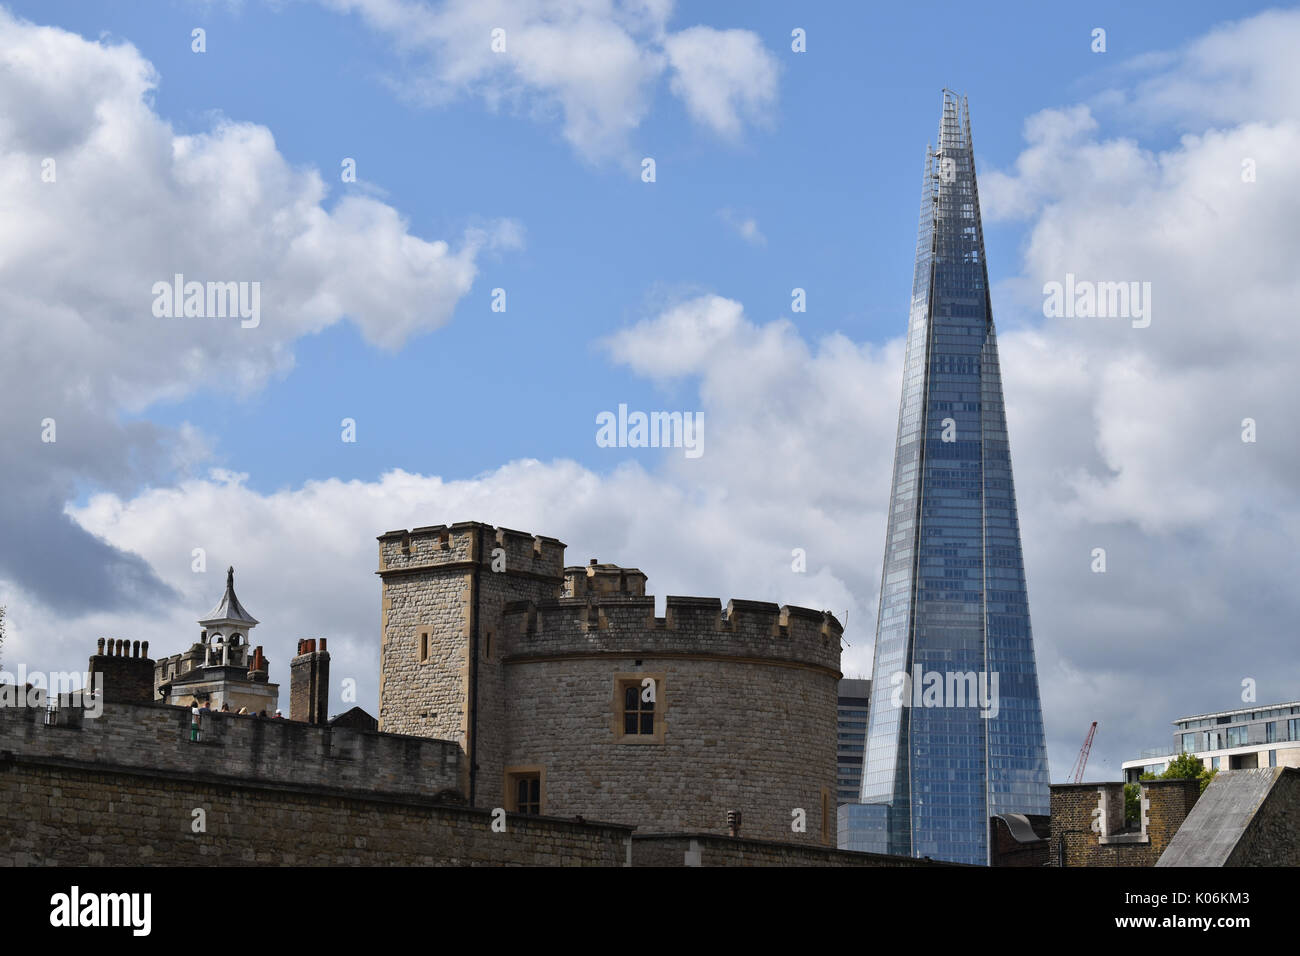 London: Tower of London and the Shard Stock Photo